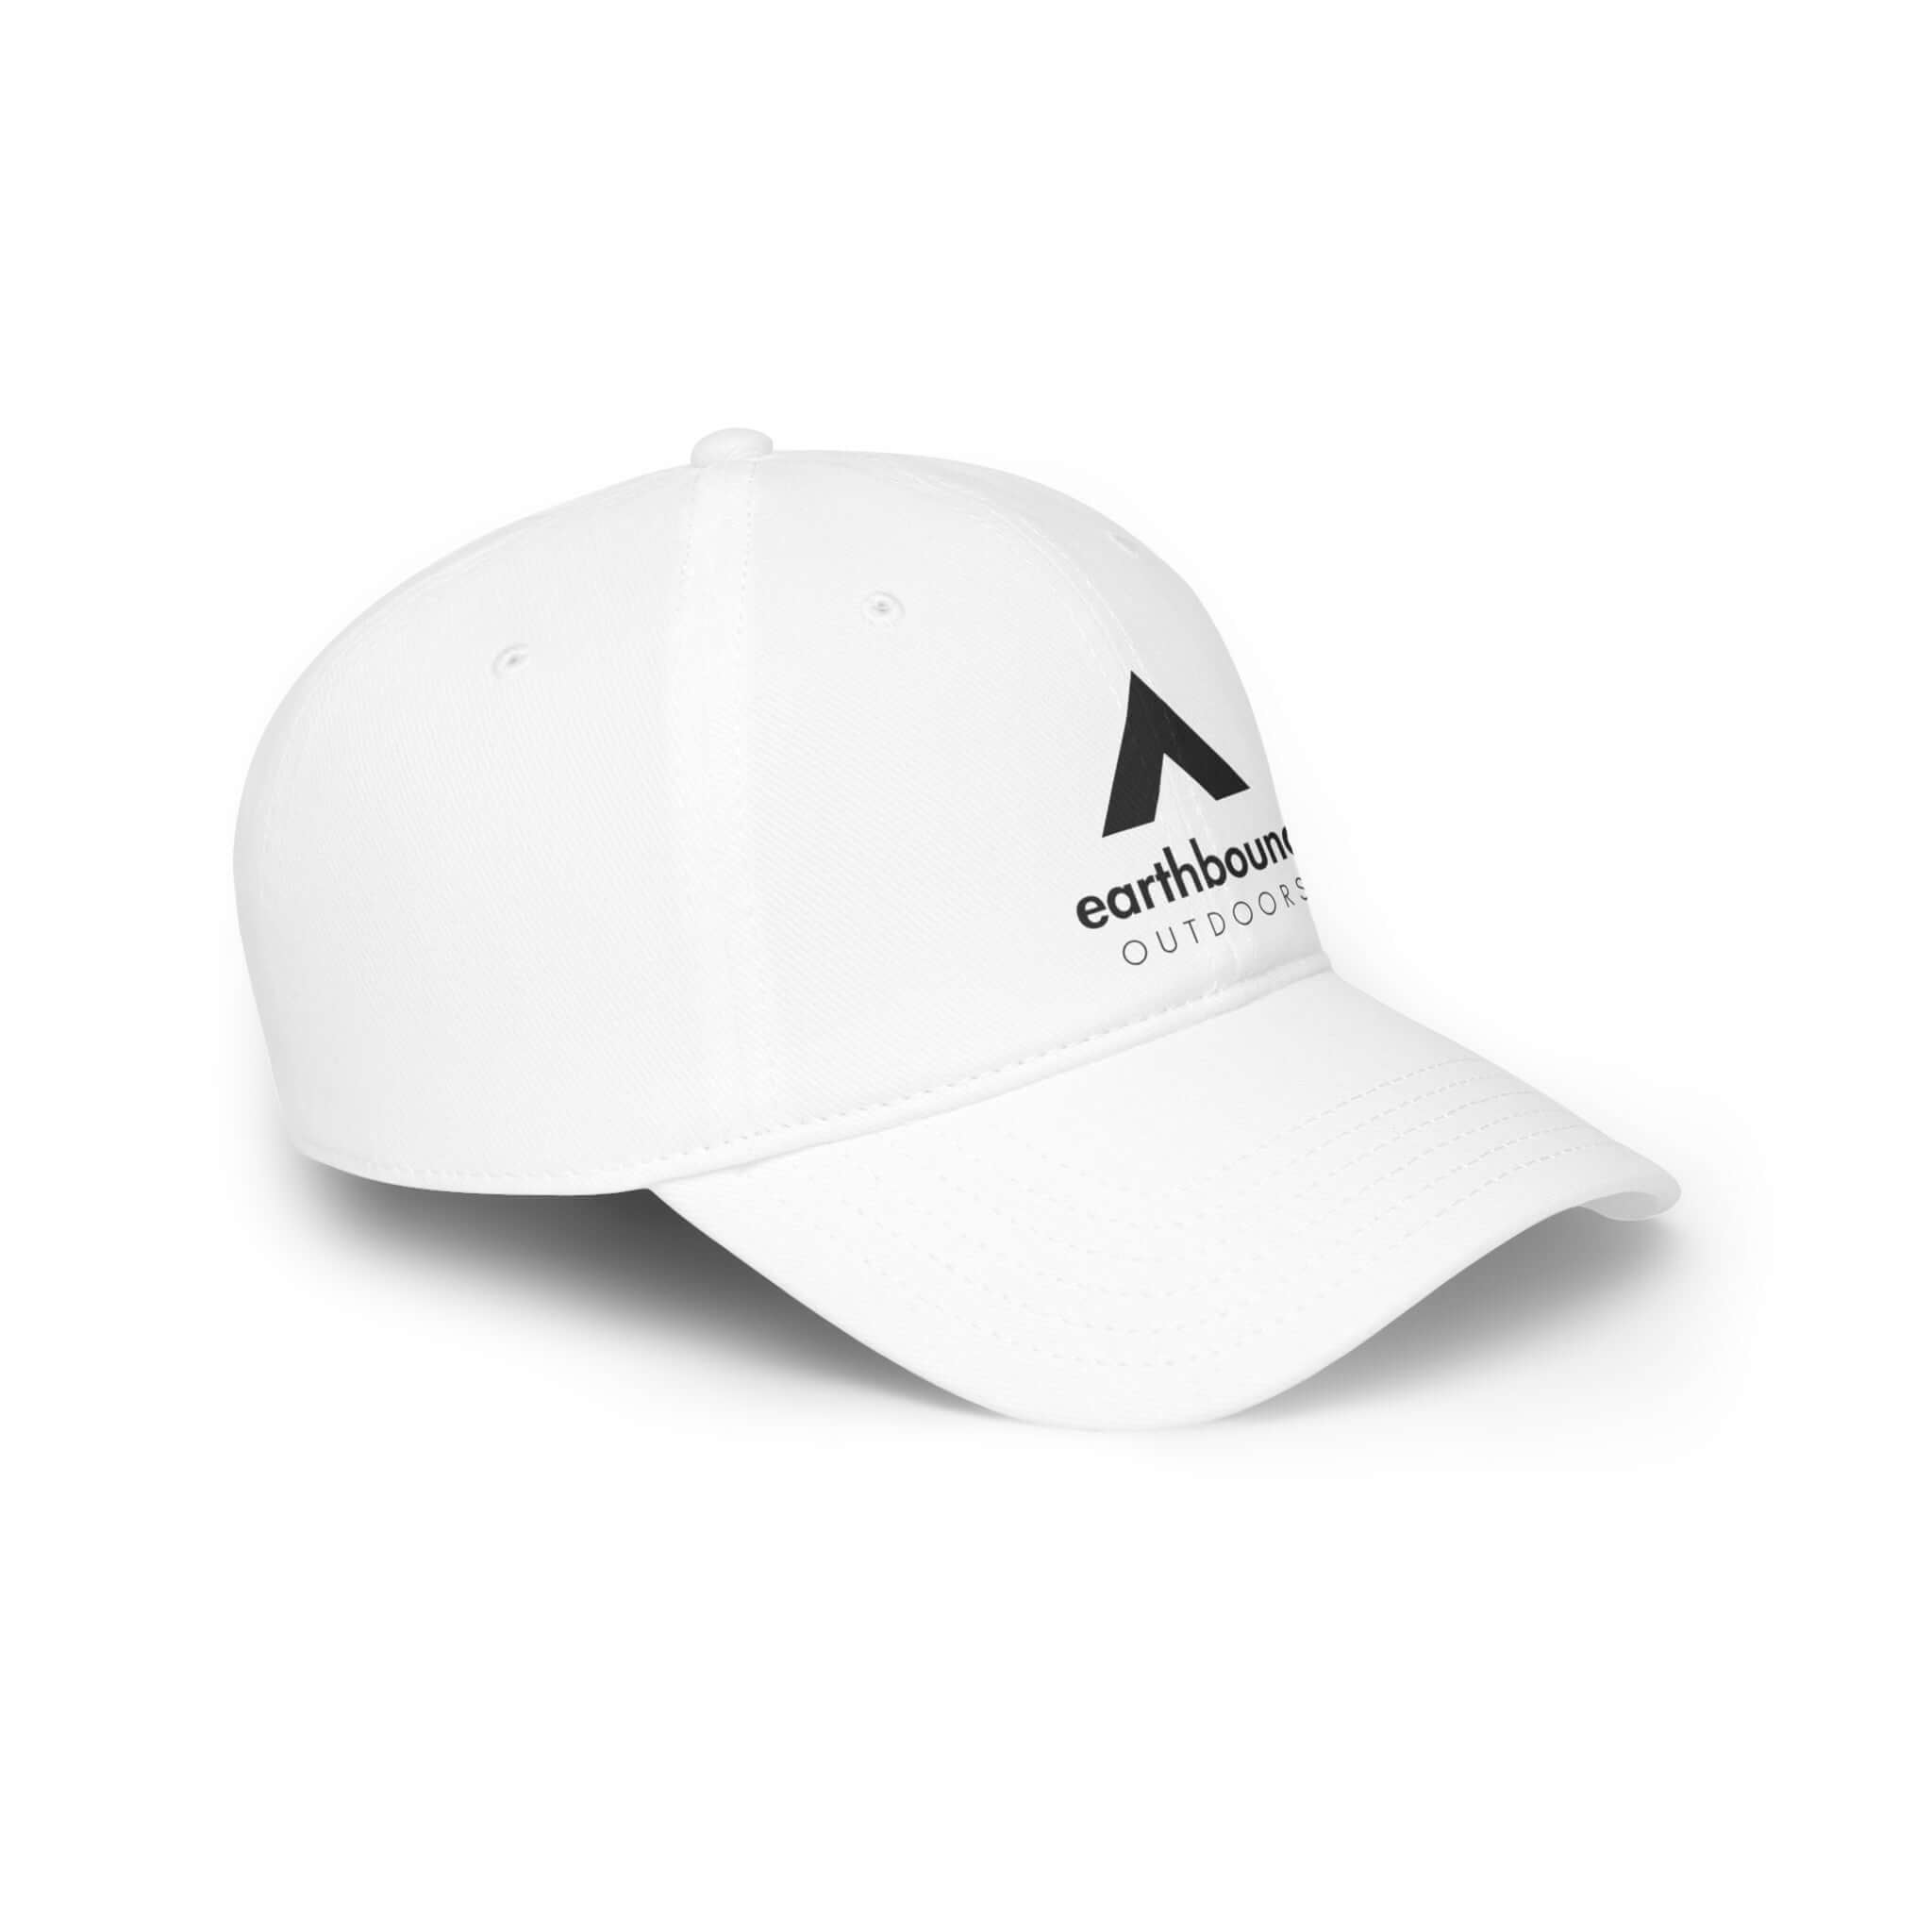 Earthbound Outdoors Low Profile Baseball Cap